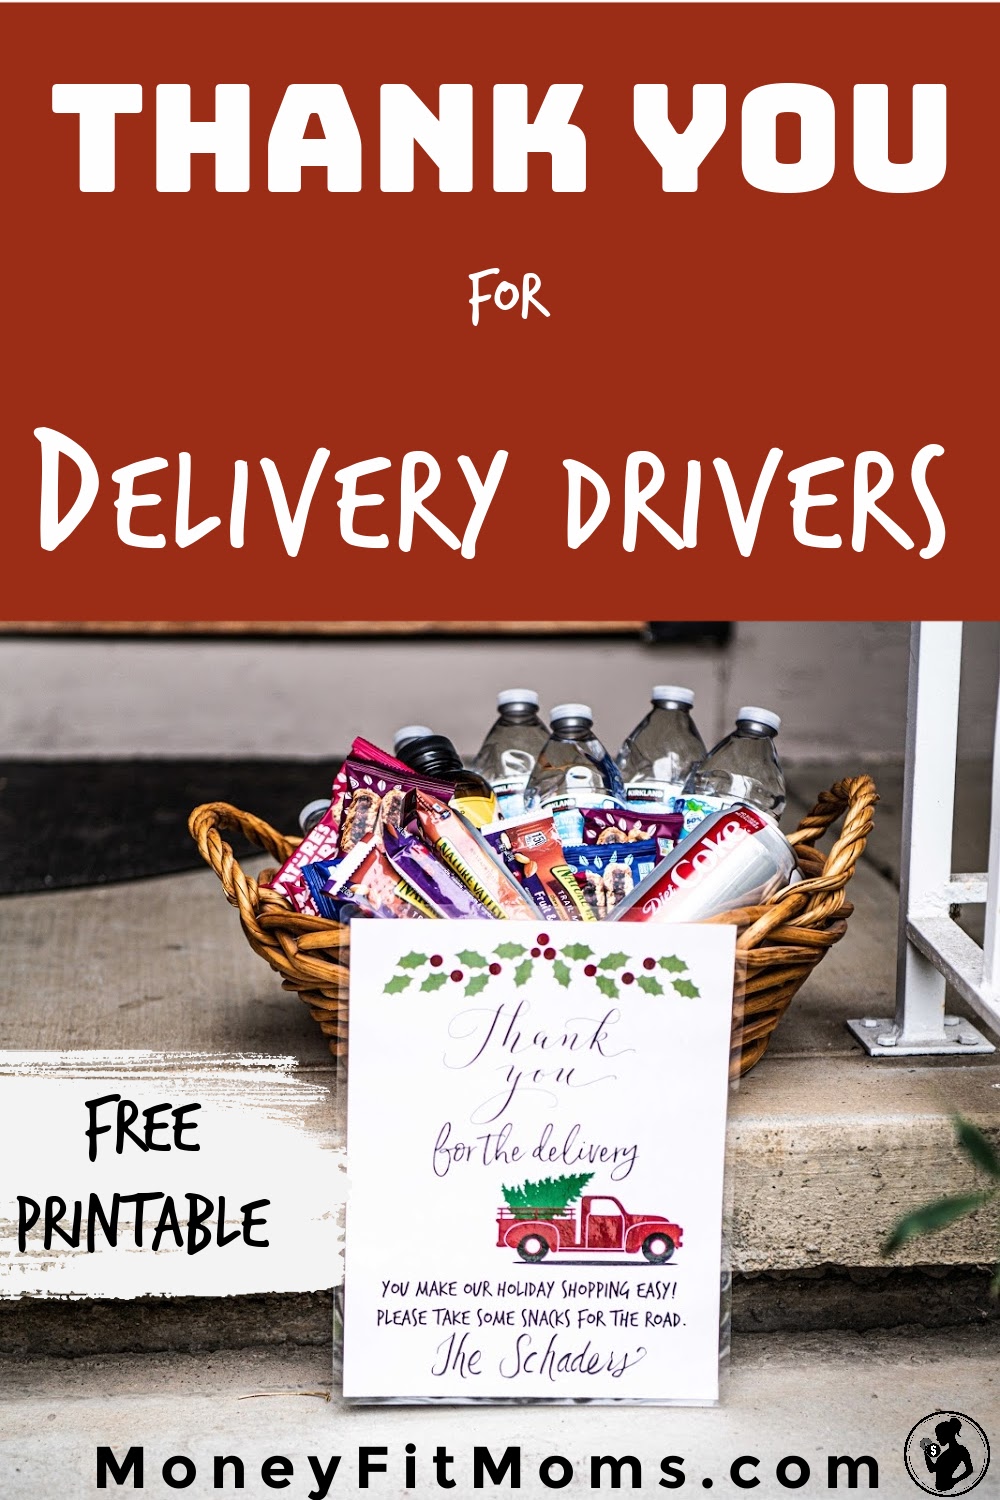 Thank you Delivery Drivers sign thank you basket treats